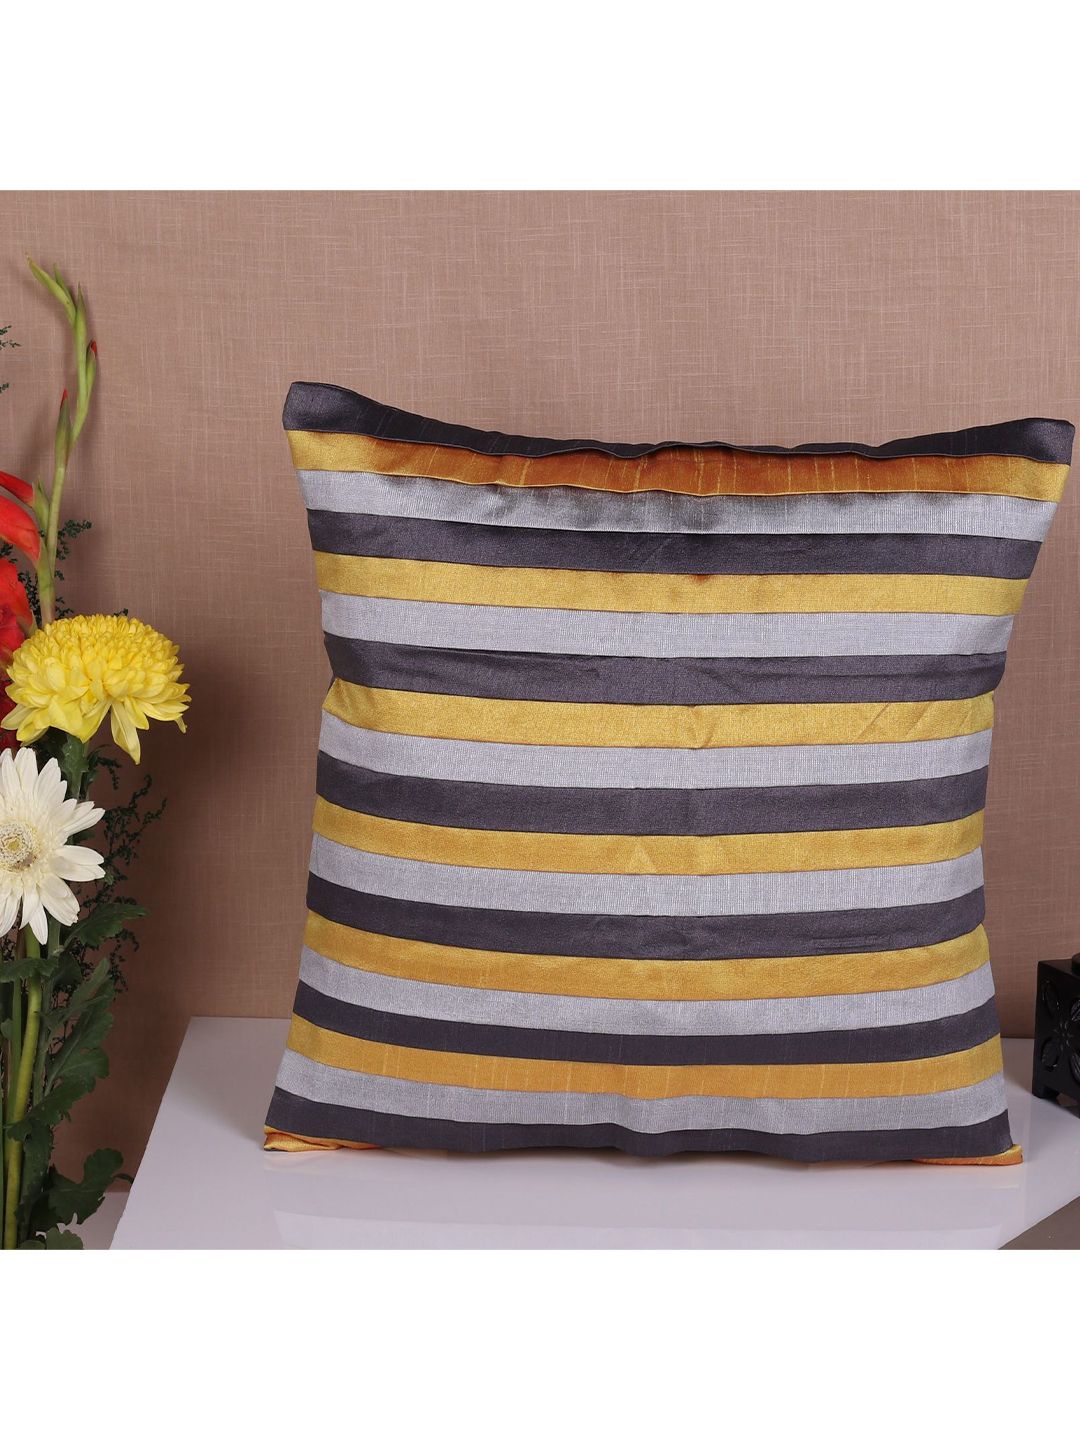 Molcha Set Of 5 Grey & Orange Striped Festive Collections Square Cushion Covers Price in India